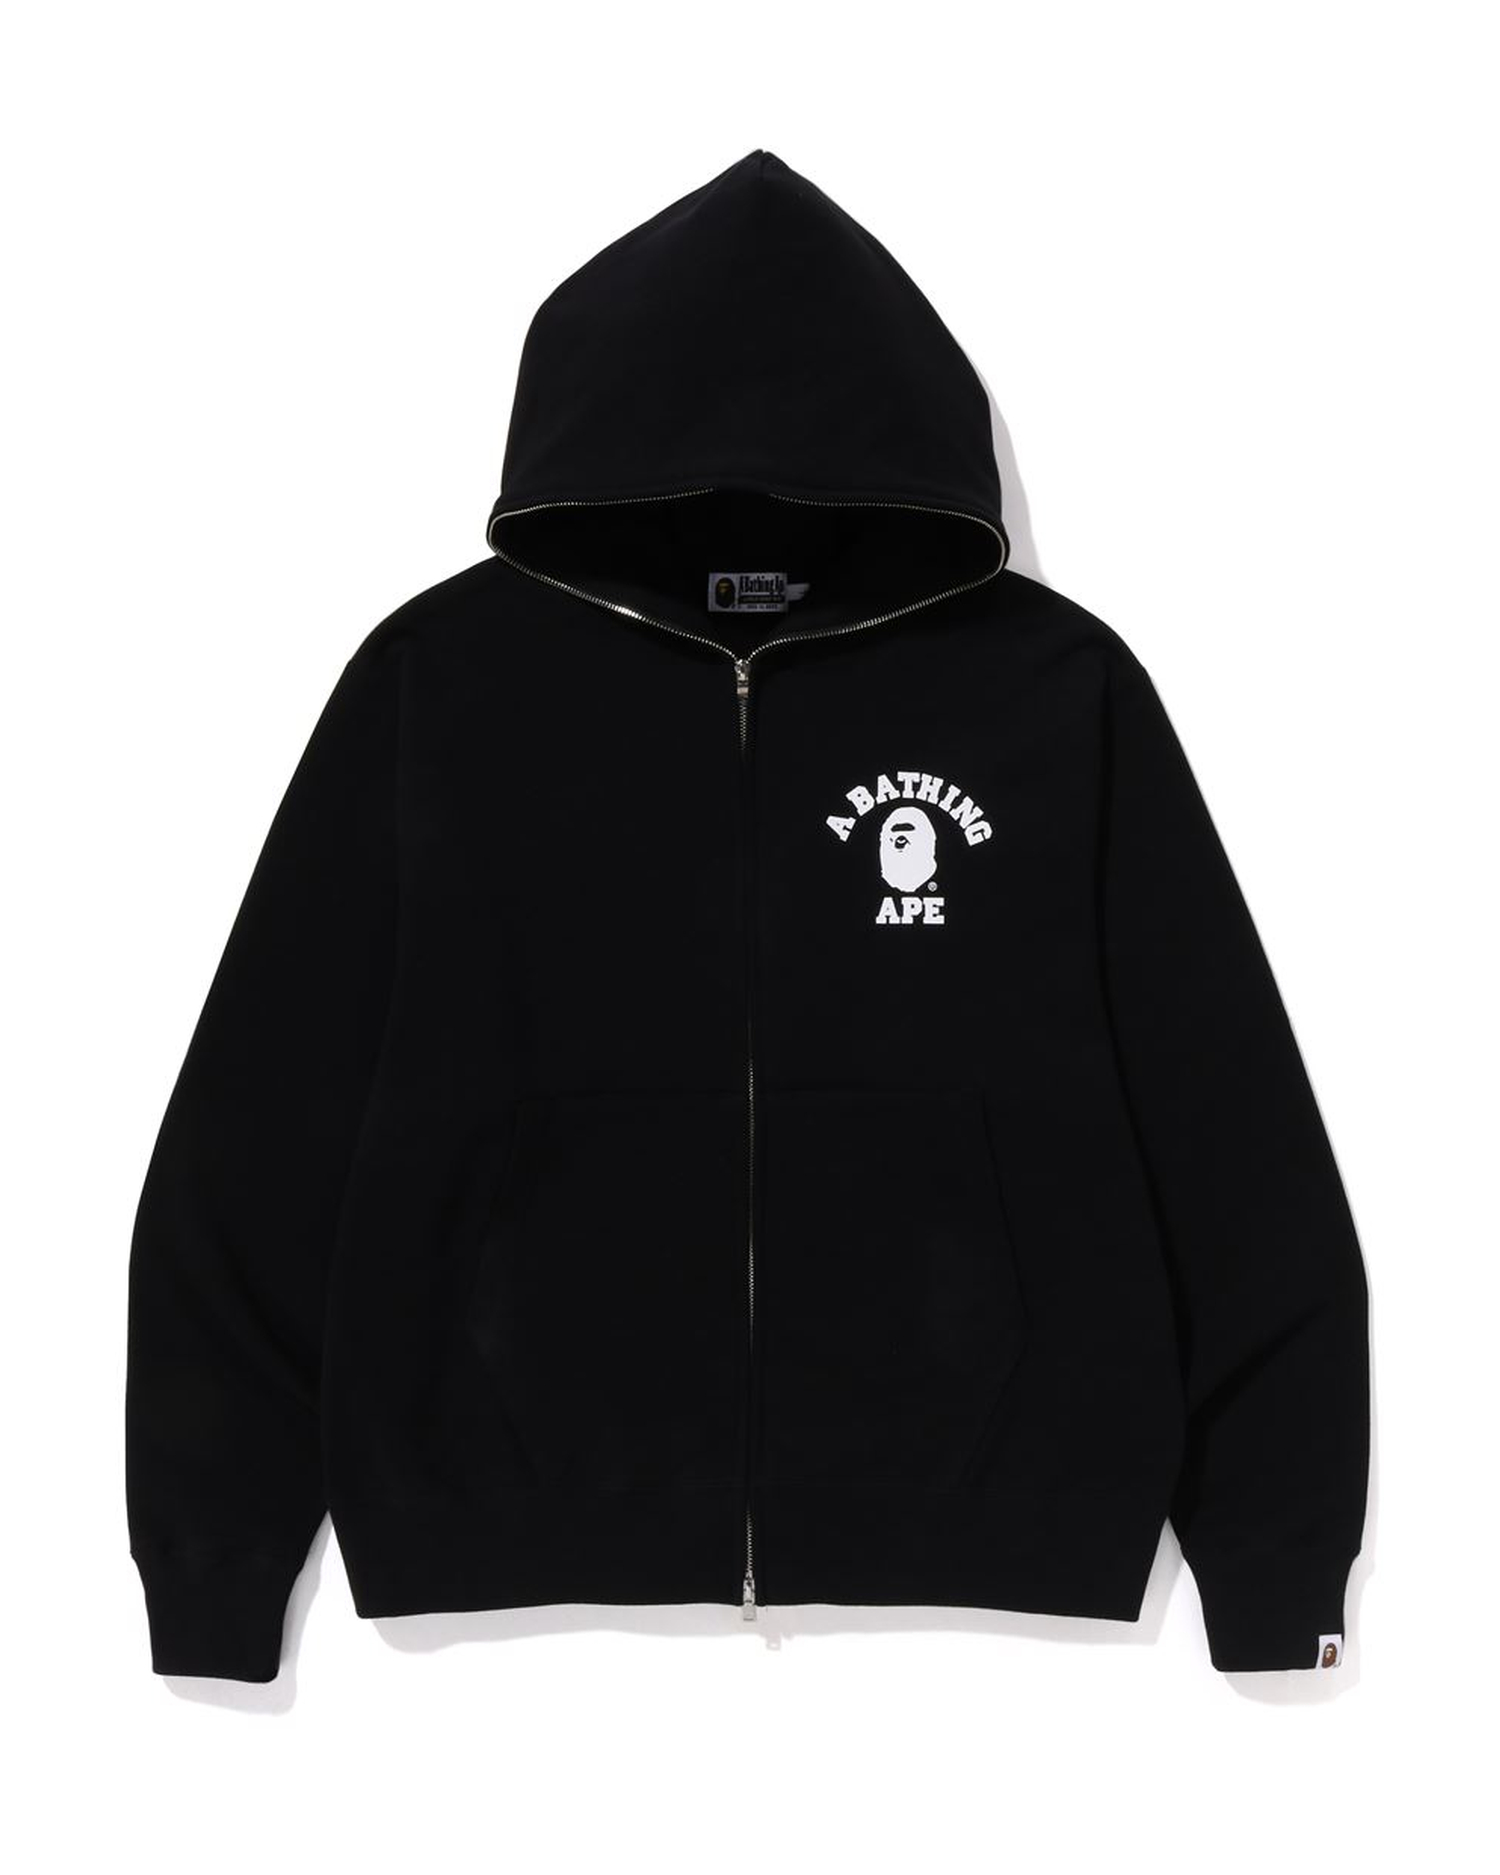 Shop College Relaxed Fit Full Zip Hoodie Online | BAPE